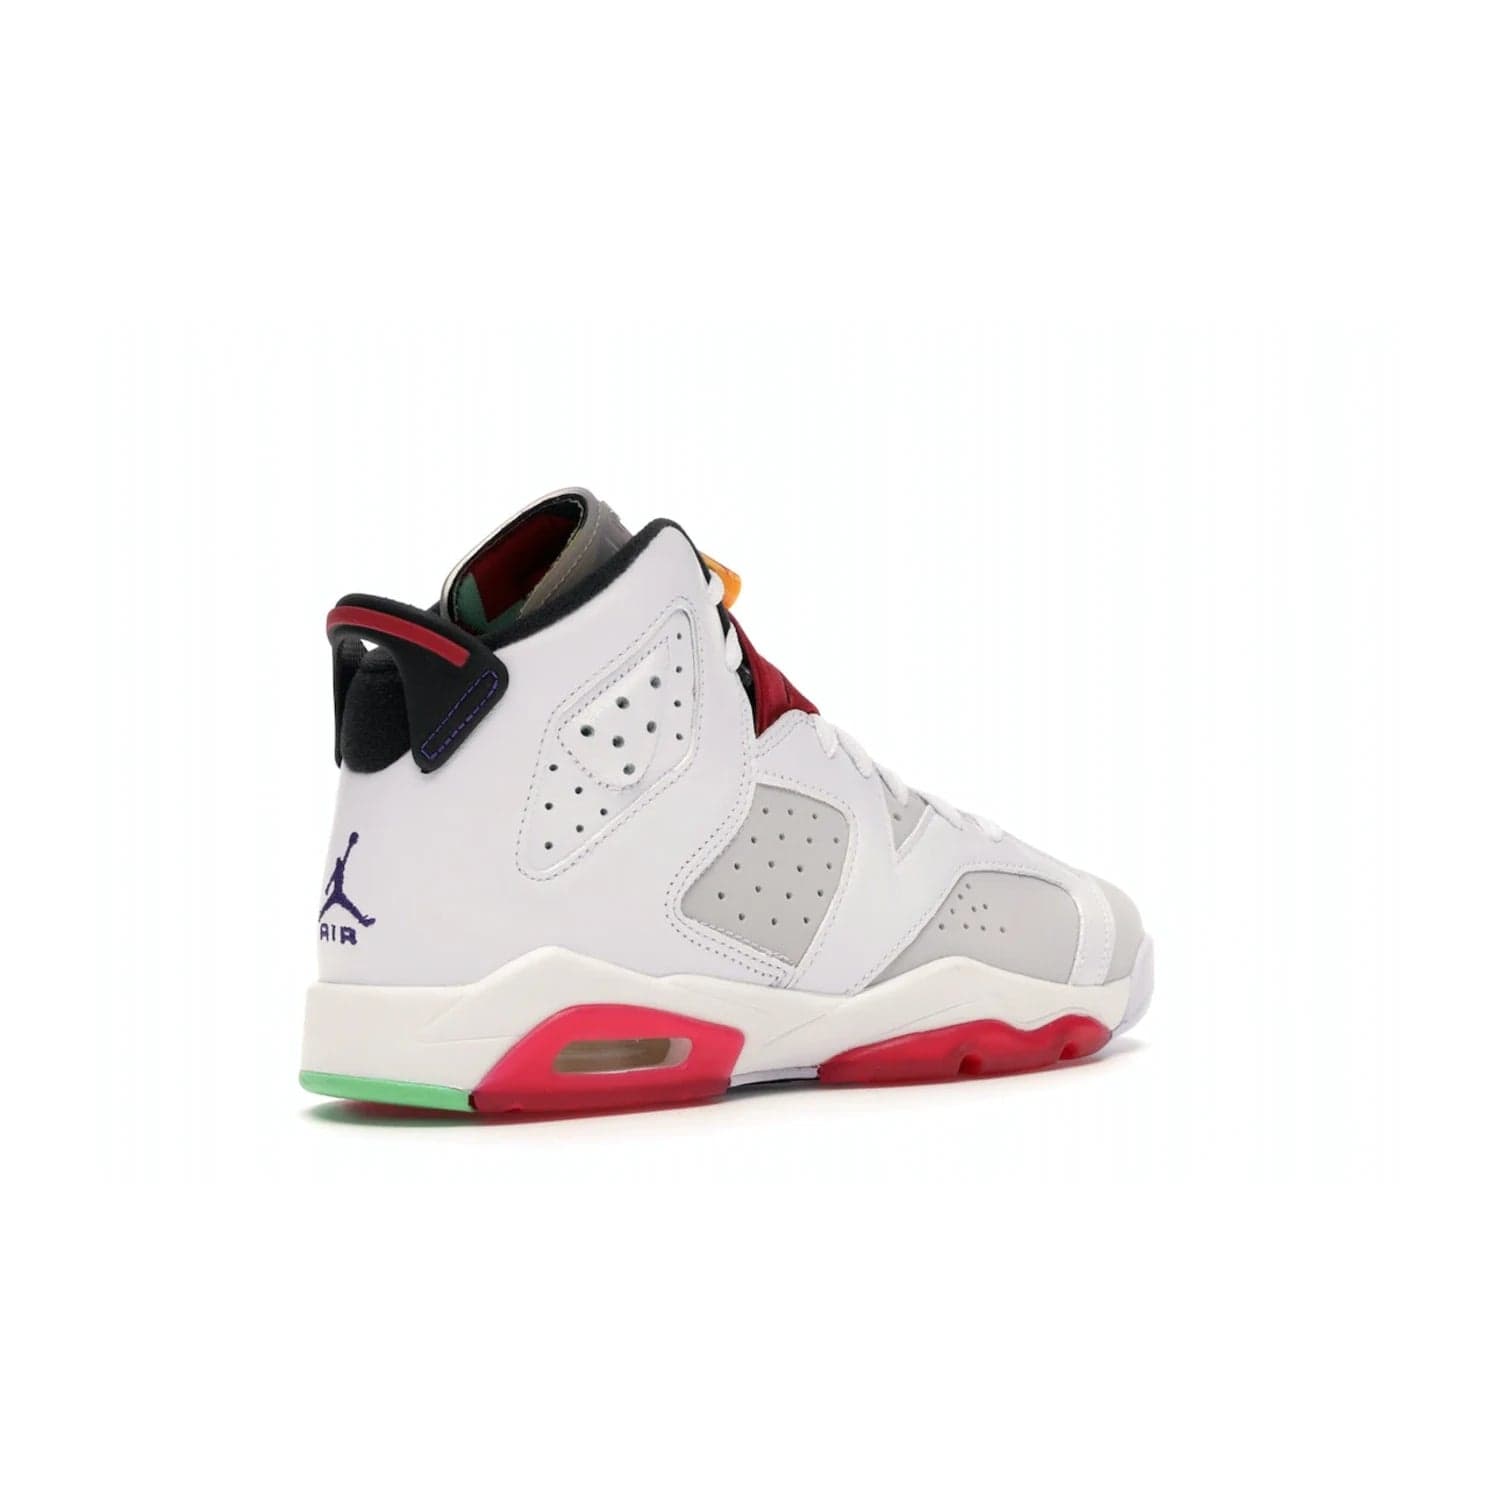 Jordan 6 Retro Hare (GS) - Image 33 - Only at www.BallersClubKickz.com - The Air Jordan 6 Hare GS. Comfortable suede upper, perforations, red pods, two-tone midsole, and signature "Jumpman" emblem. Released 17 June 2020. Perfect for any sneakerhead.